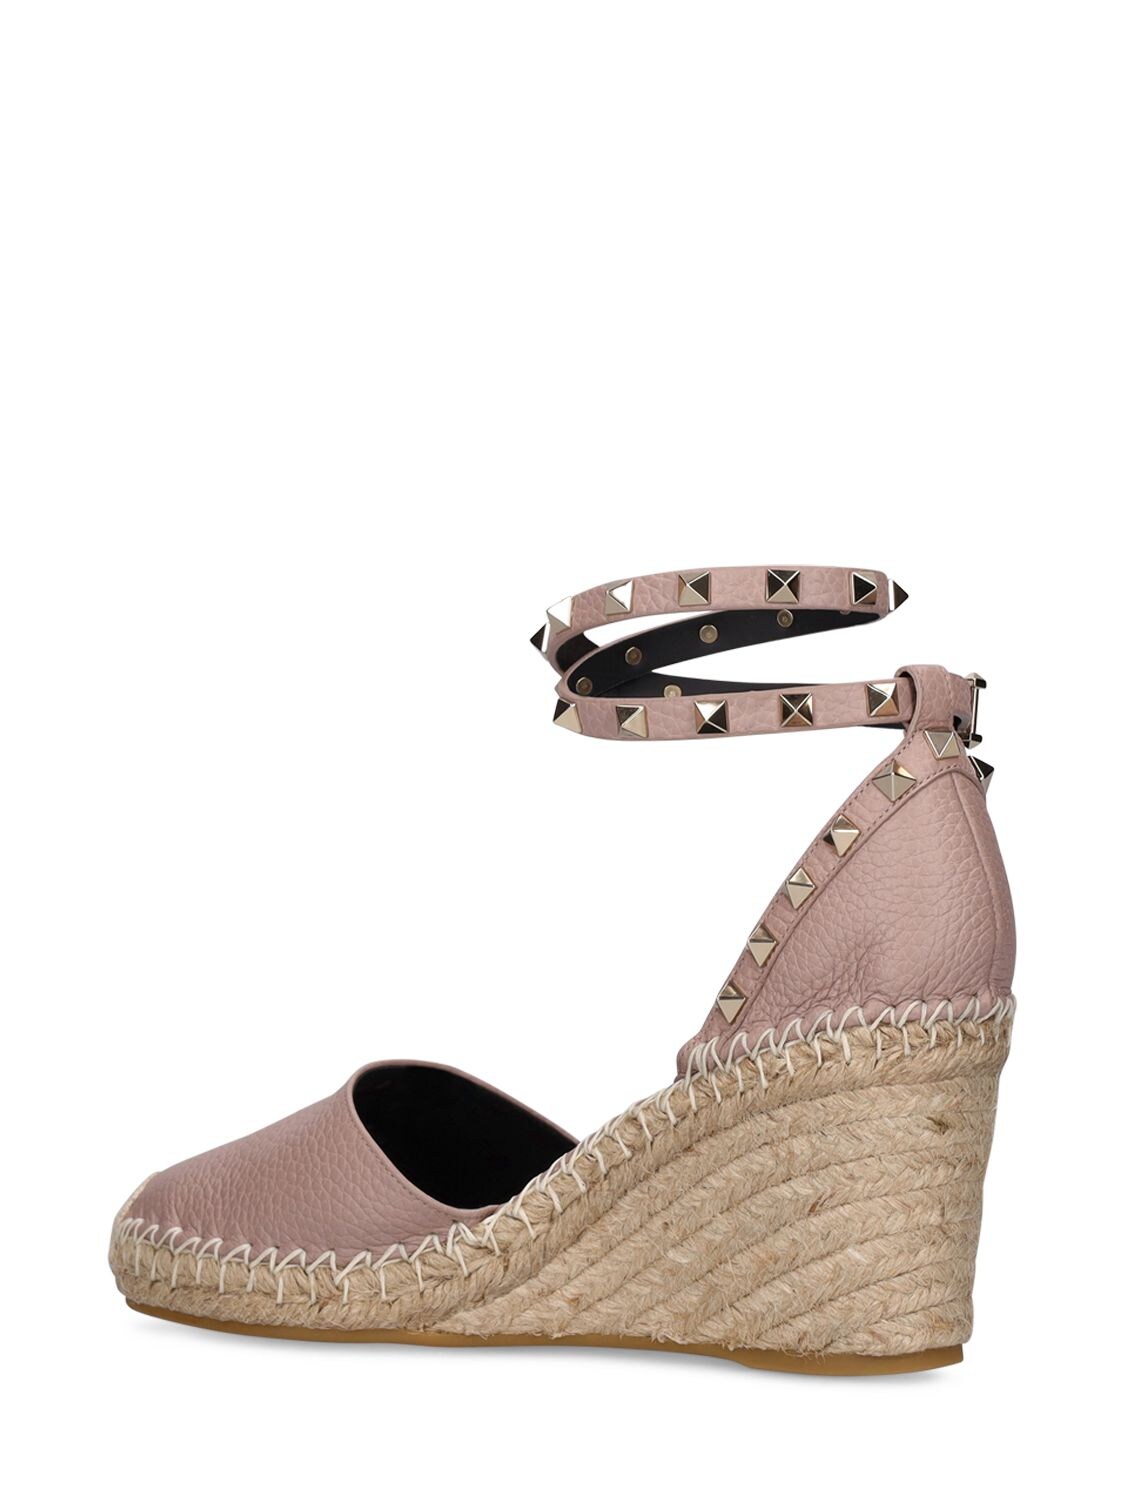 Shop Valentino 85mm Rockstud Leather Wedges In Poudre